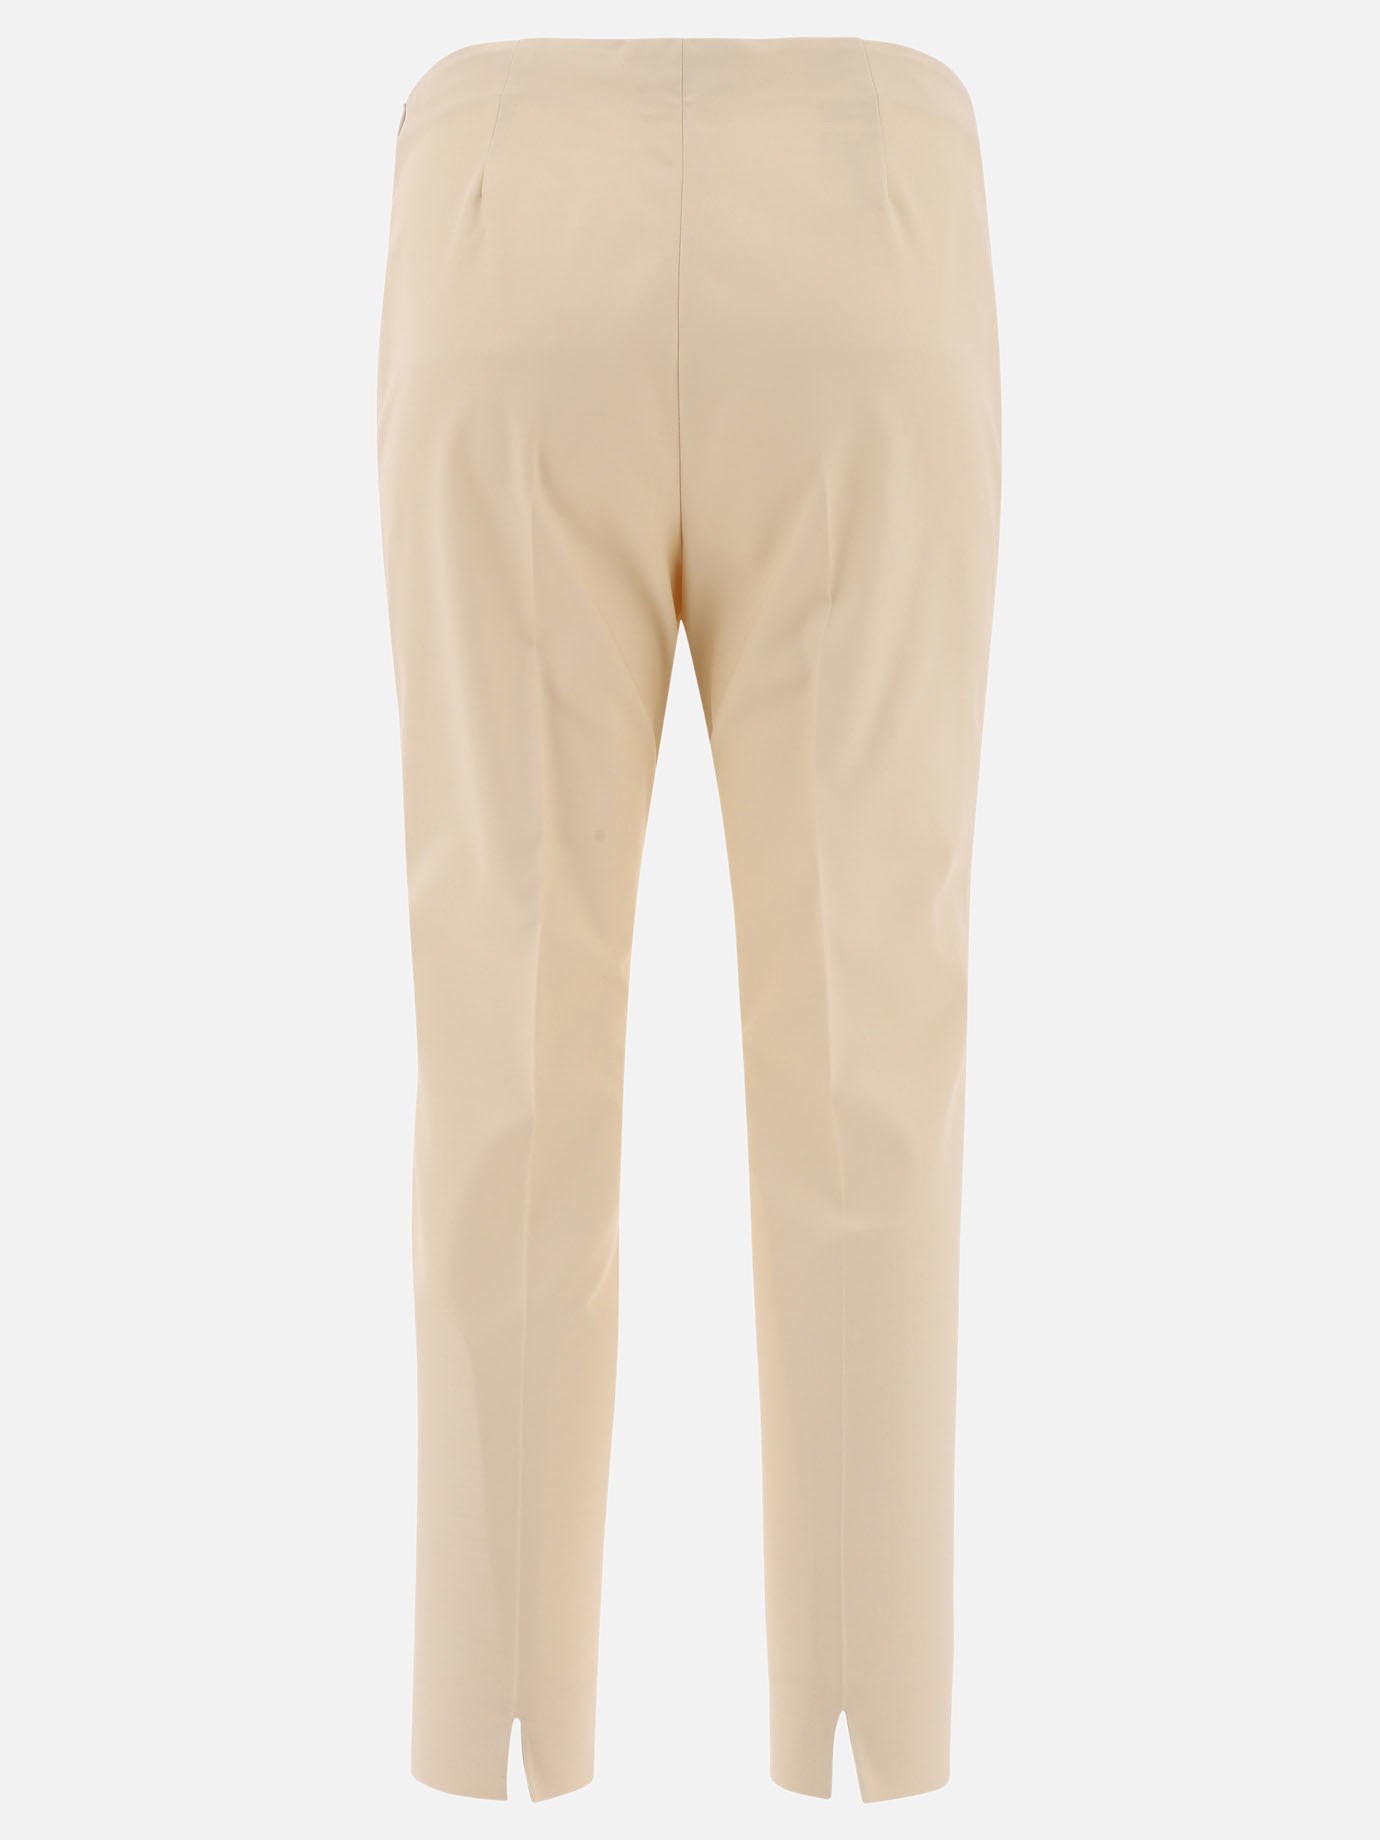 Cropped trousers by Peserico